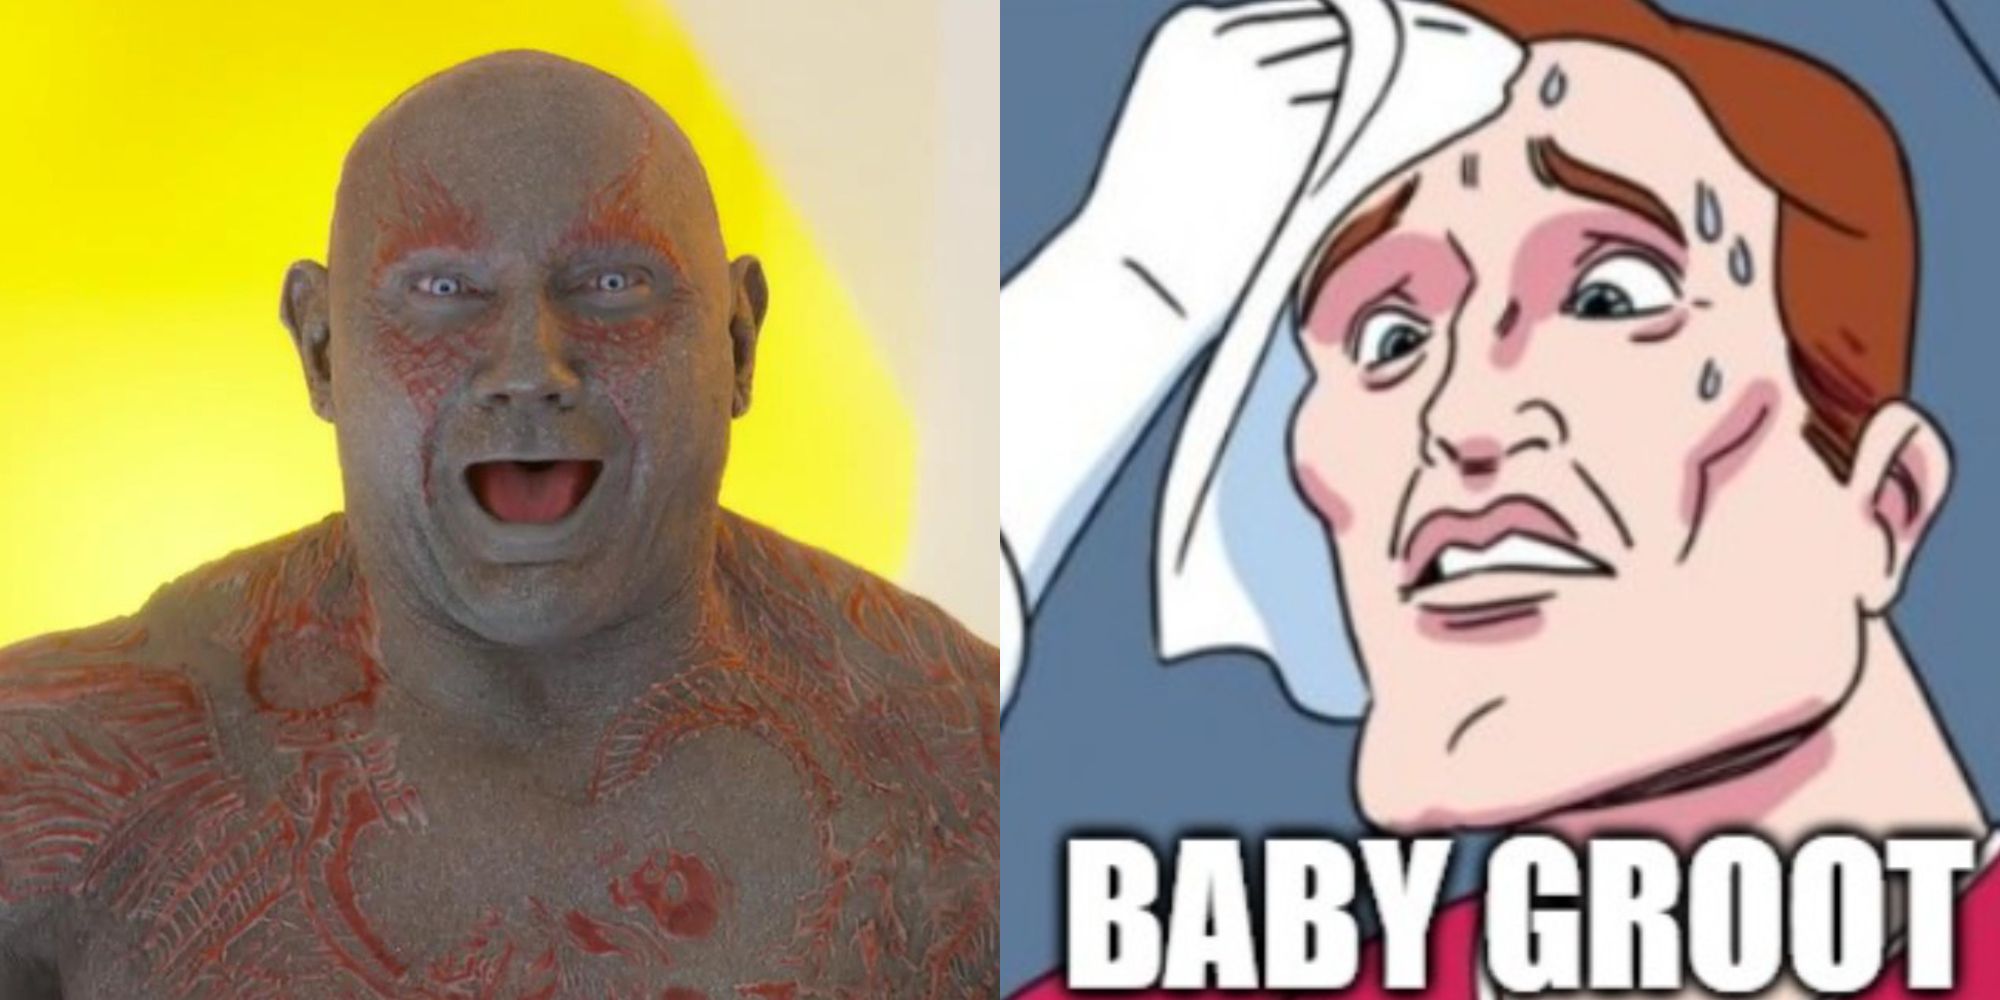 A split image of Drax and a 